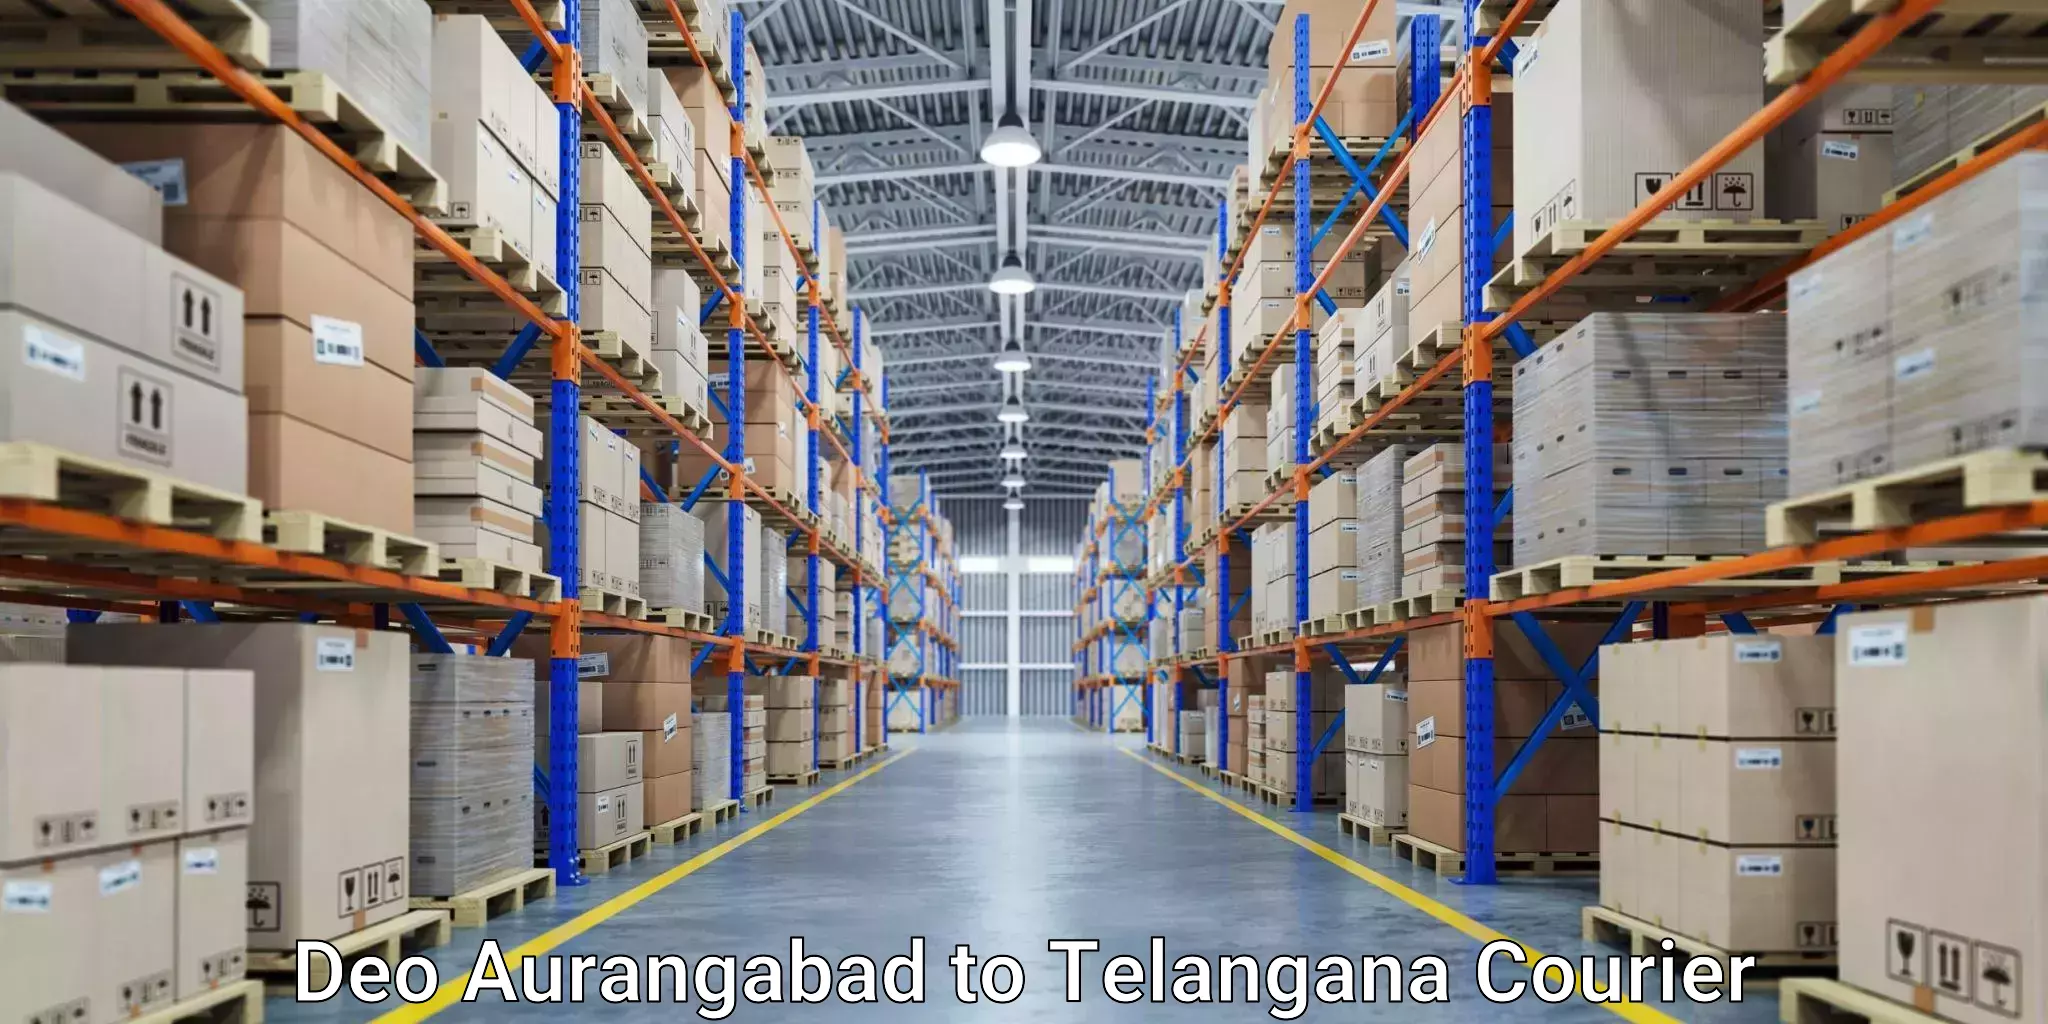 Comprehensive shipping services Deo Aurangabad to Cheyyur